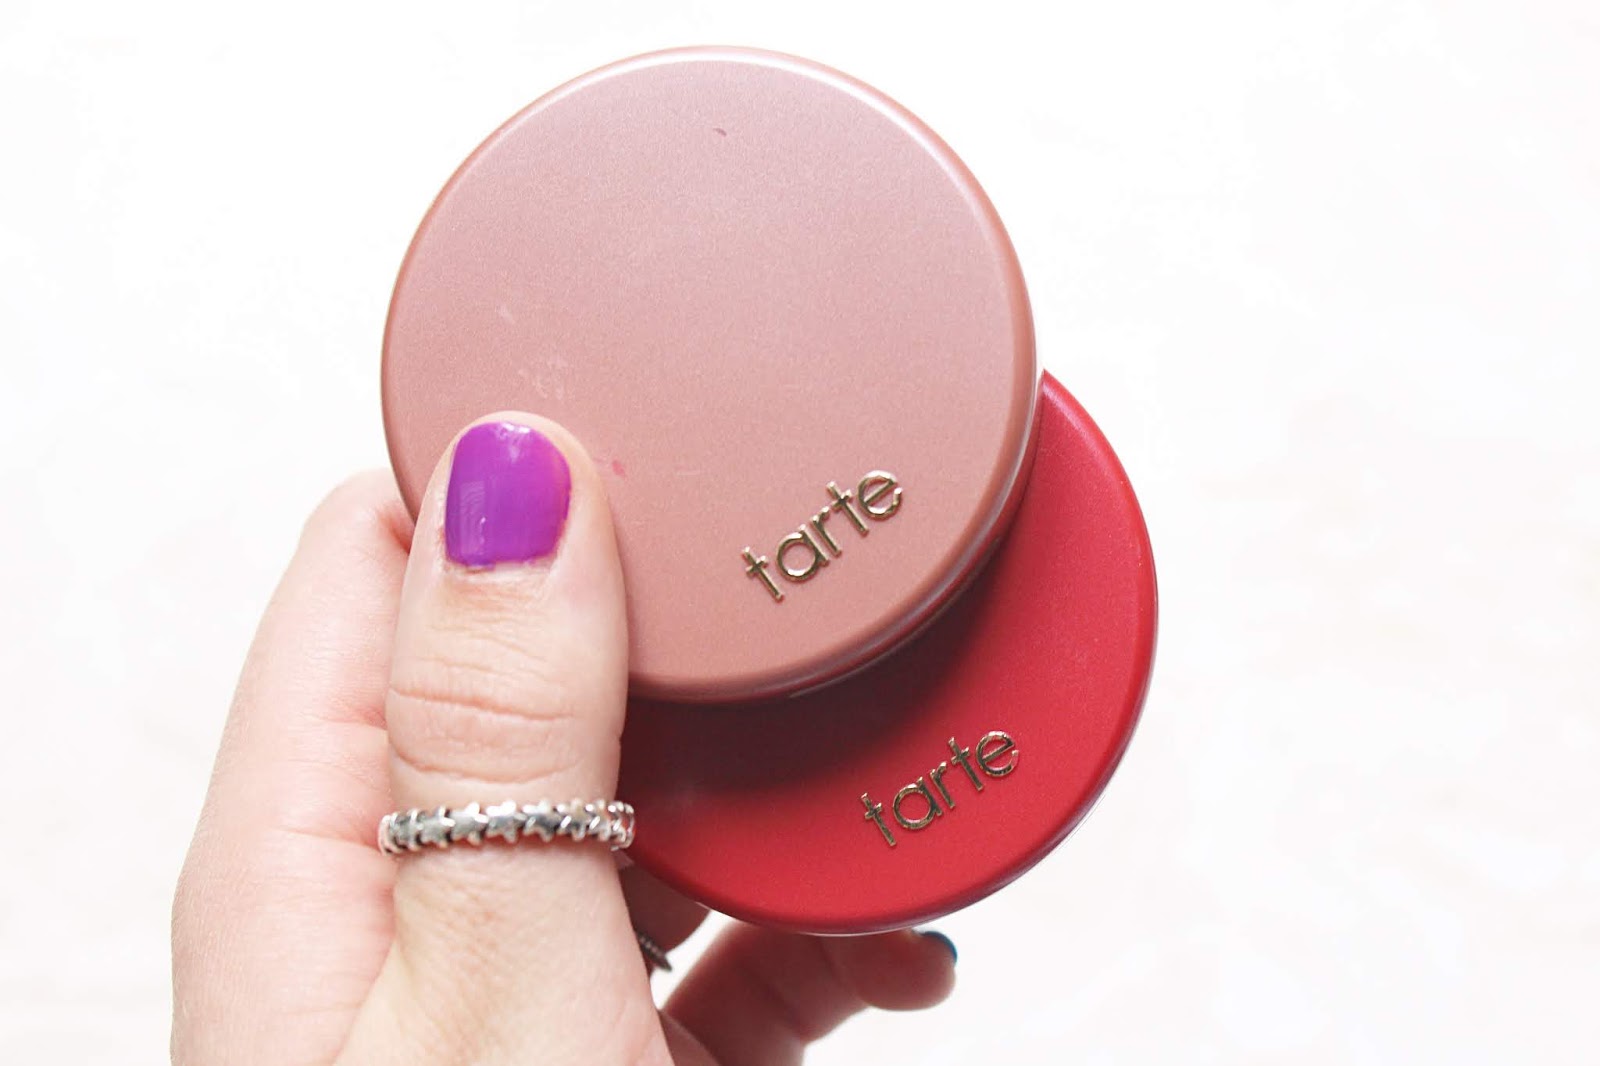 Tarte Amazonian Clay Blushes Review